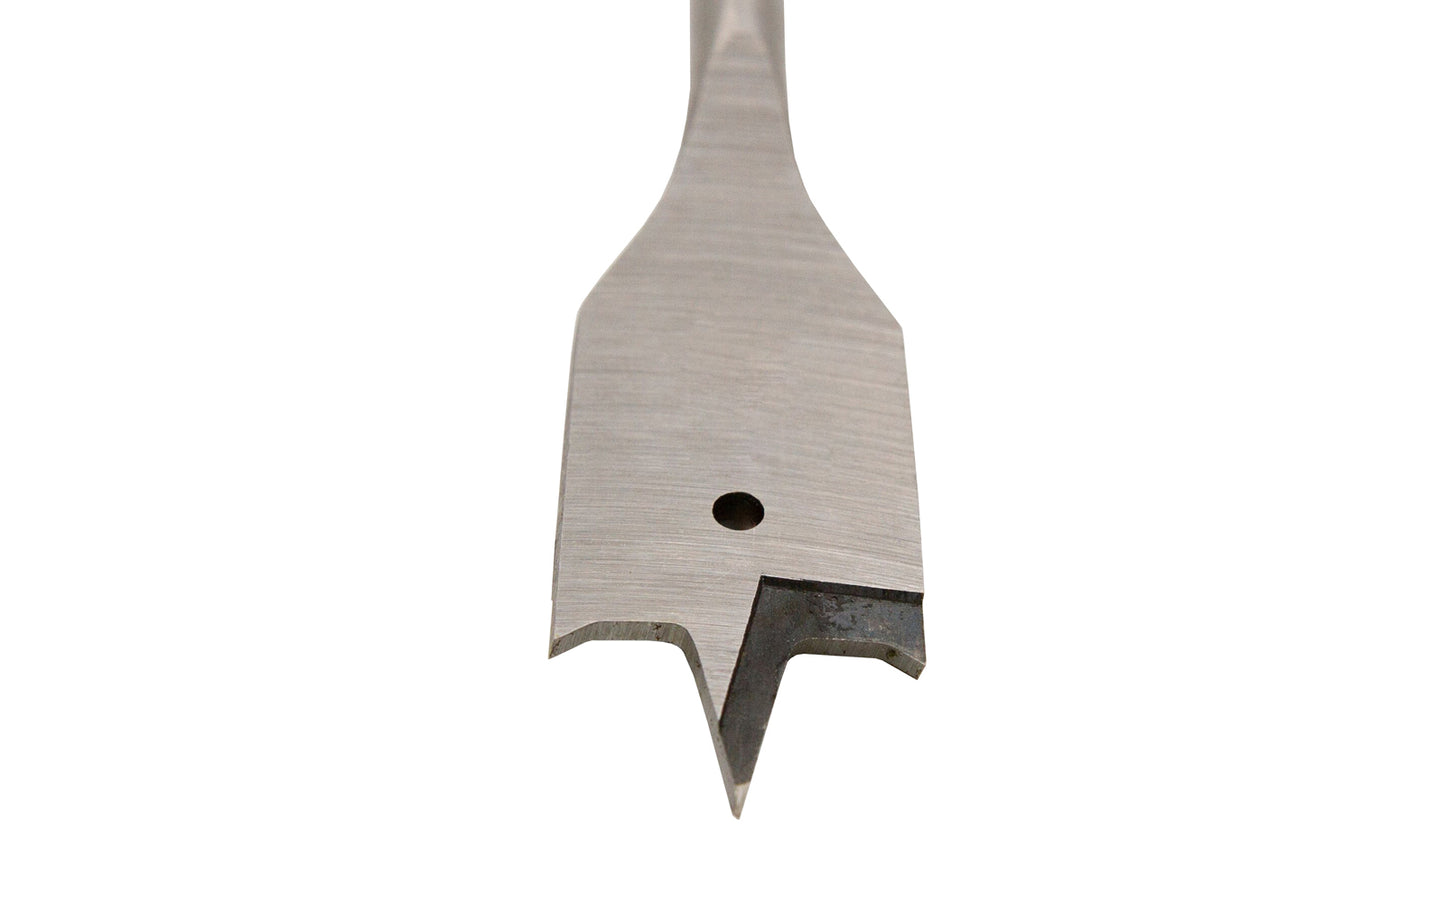 Wood Owl Flat Boring Spade Bit ~ 6" Long - Precision ground & spurred cutting edges for smooth, finished holes - 6" Length